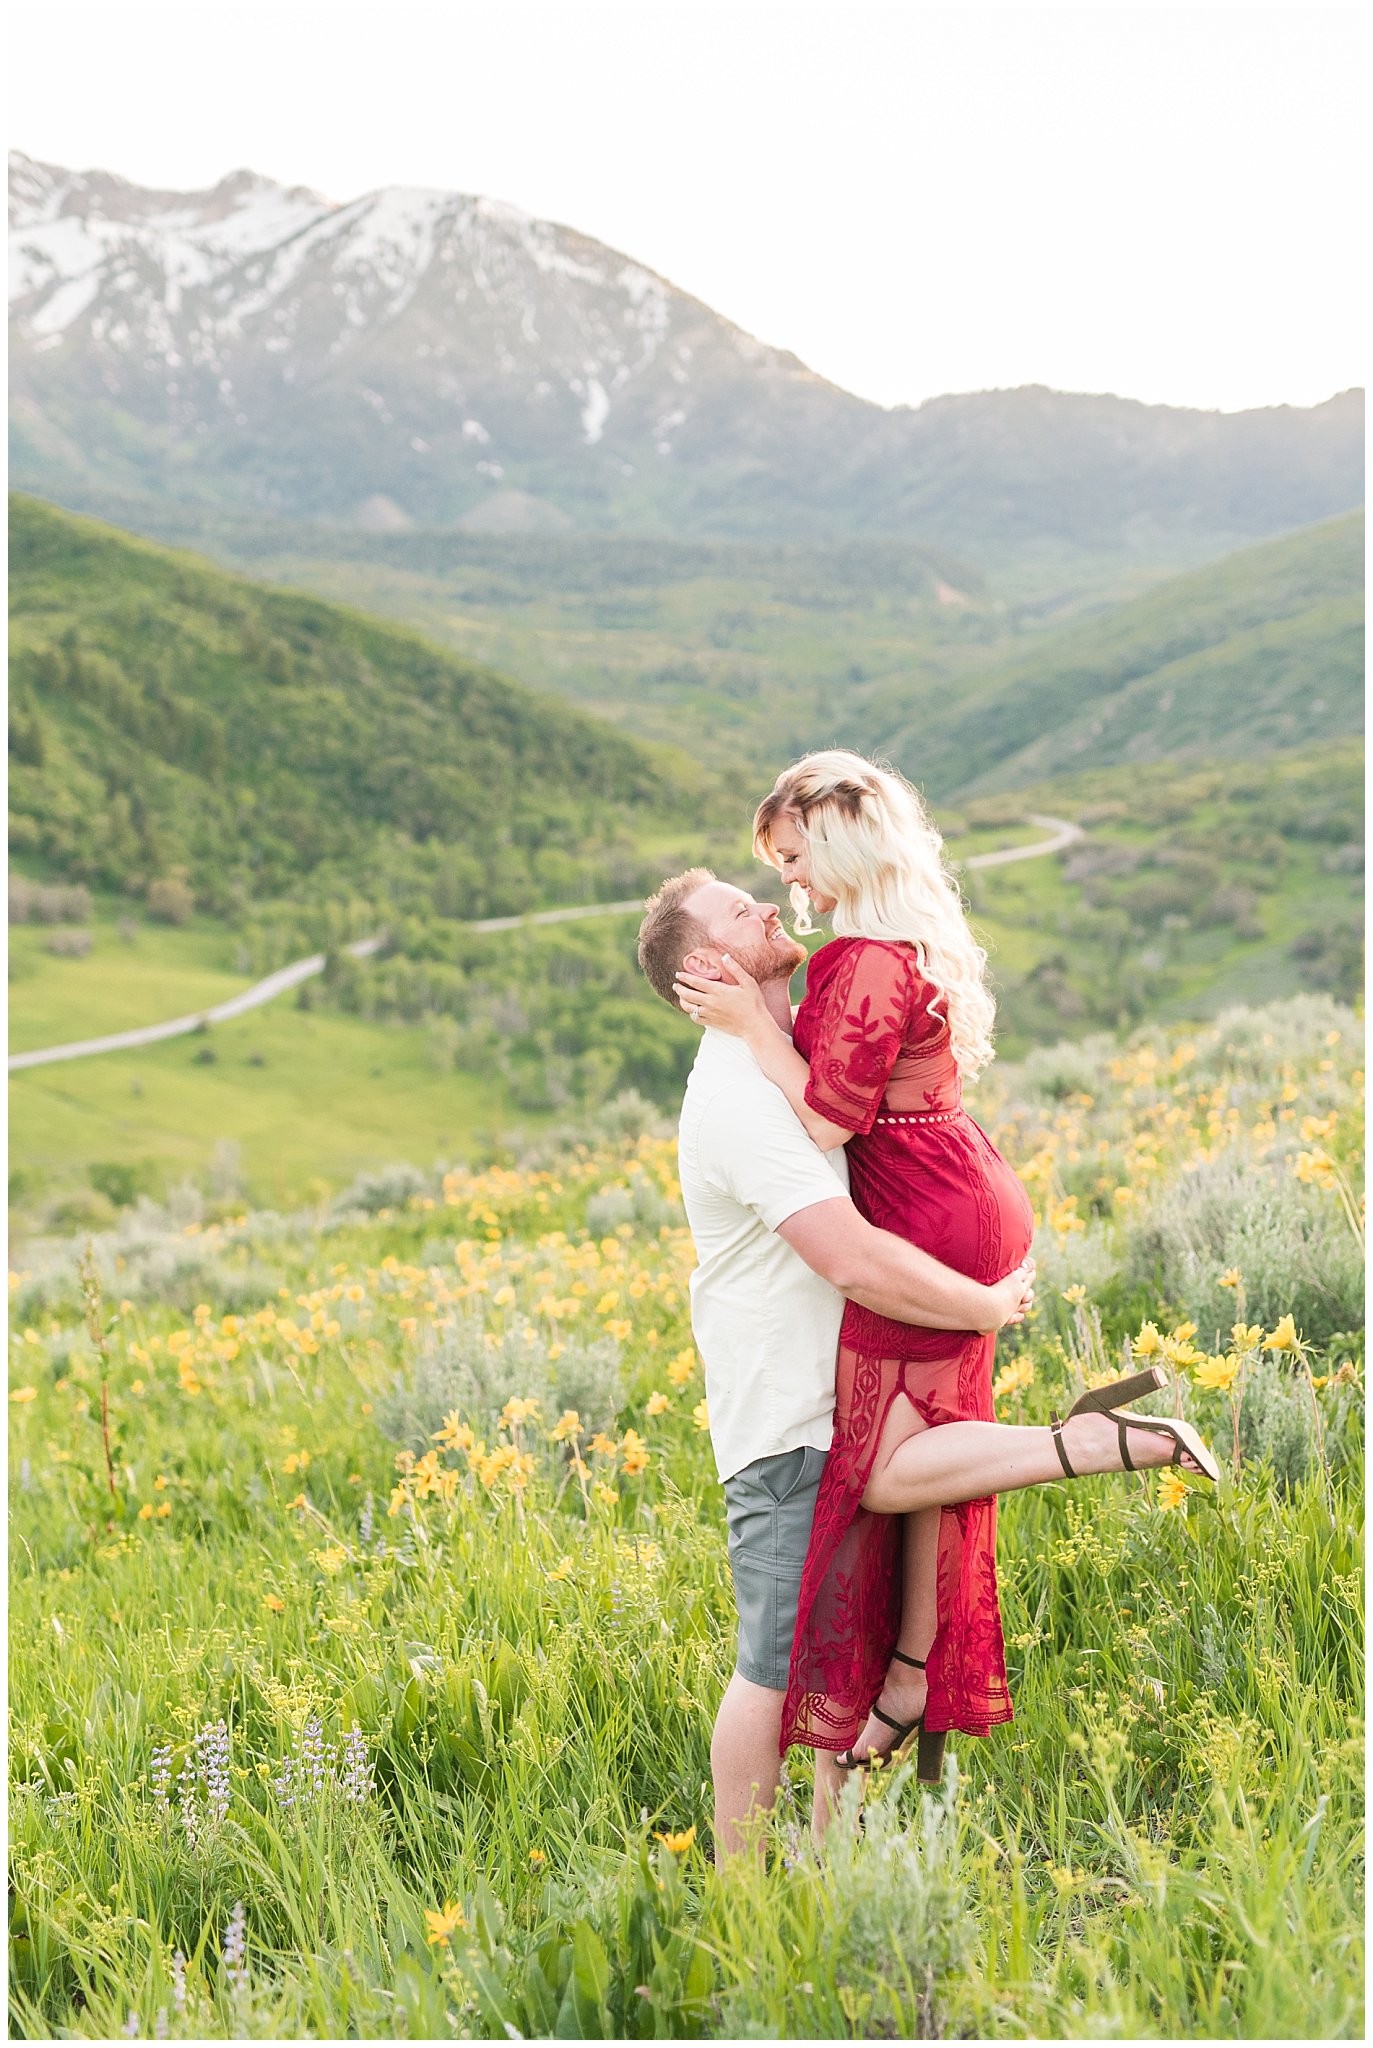 Couple does romantic lift in the wildflowers in front of snow capped Utah mountains | Top Utah Wedding and Couples Photos 2019 | Jessie and Dallin Photography